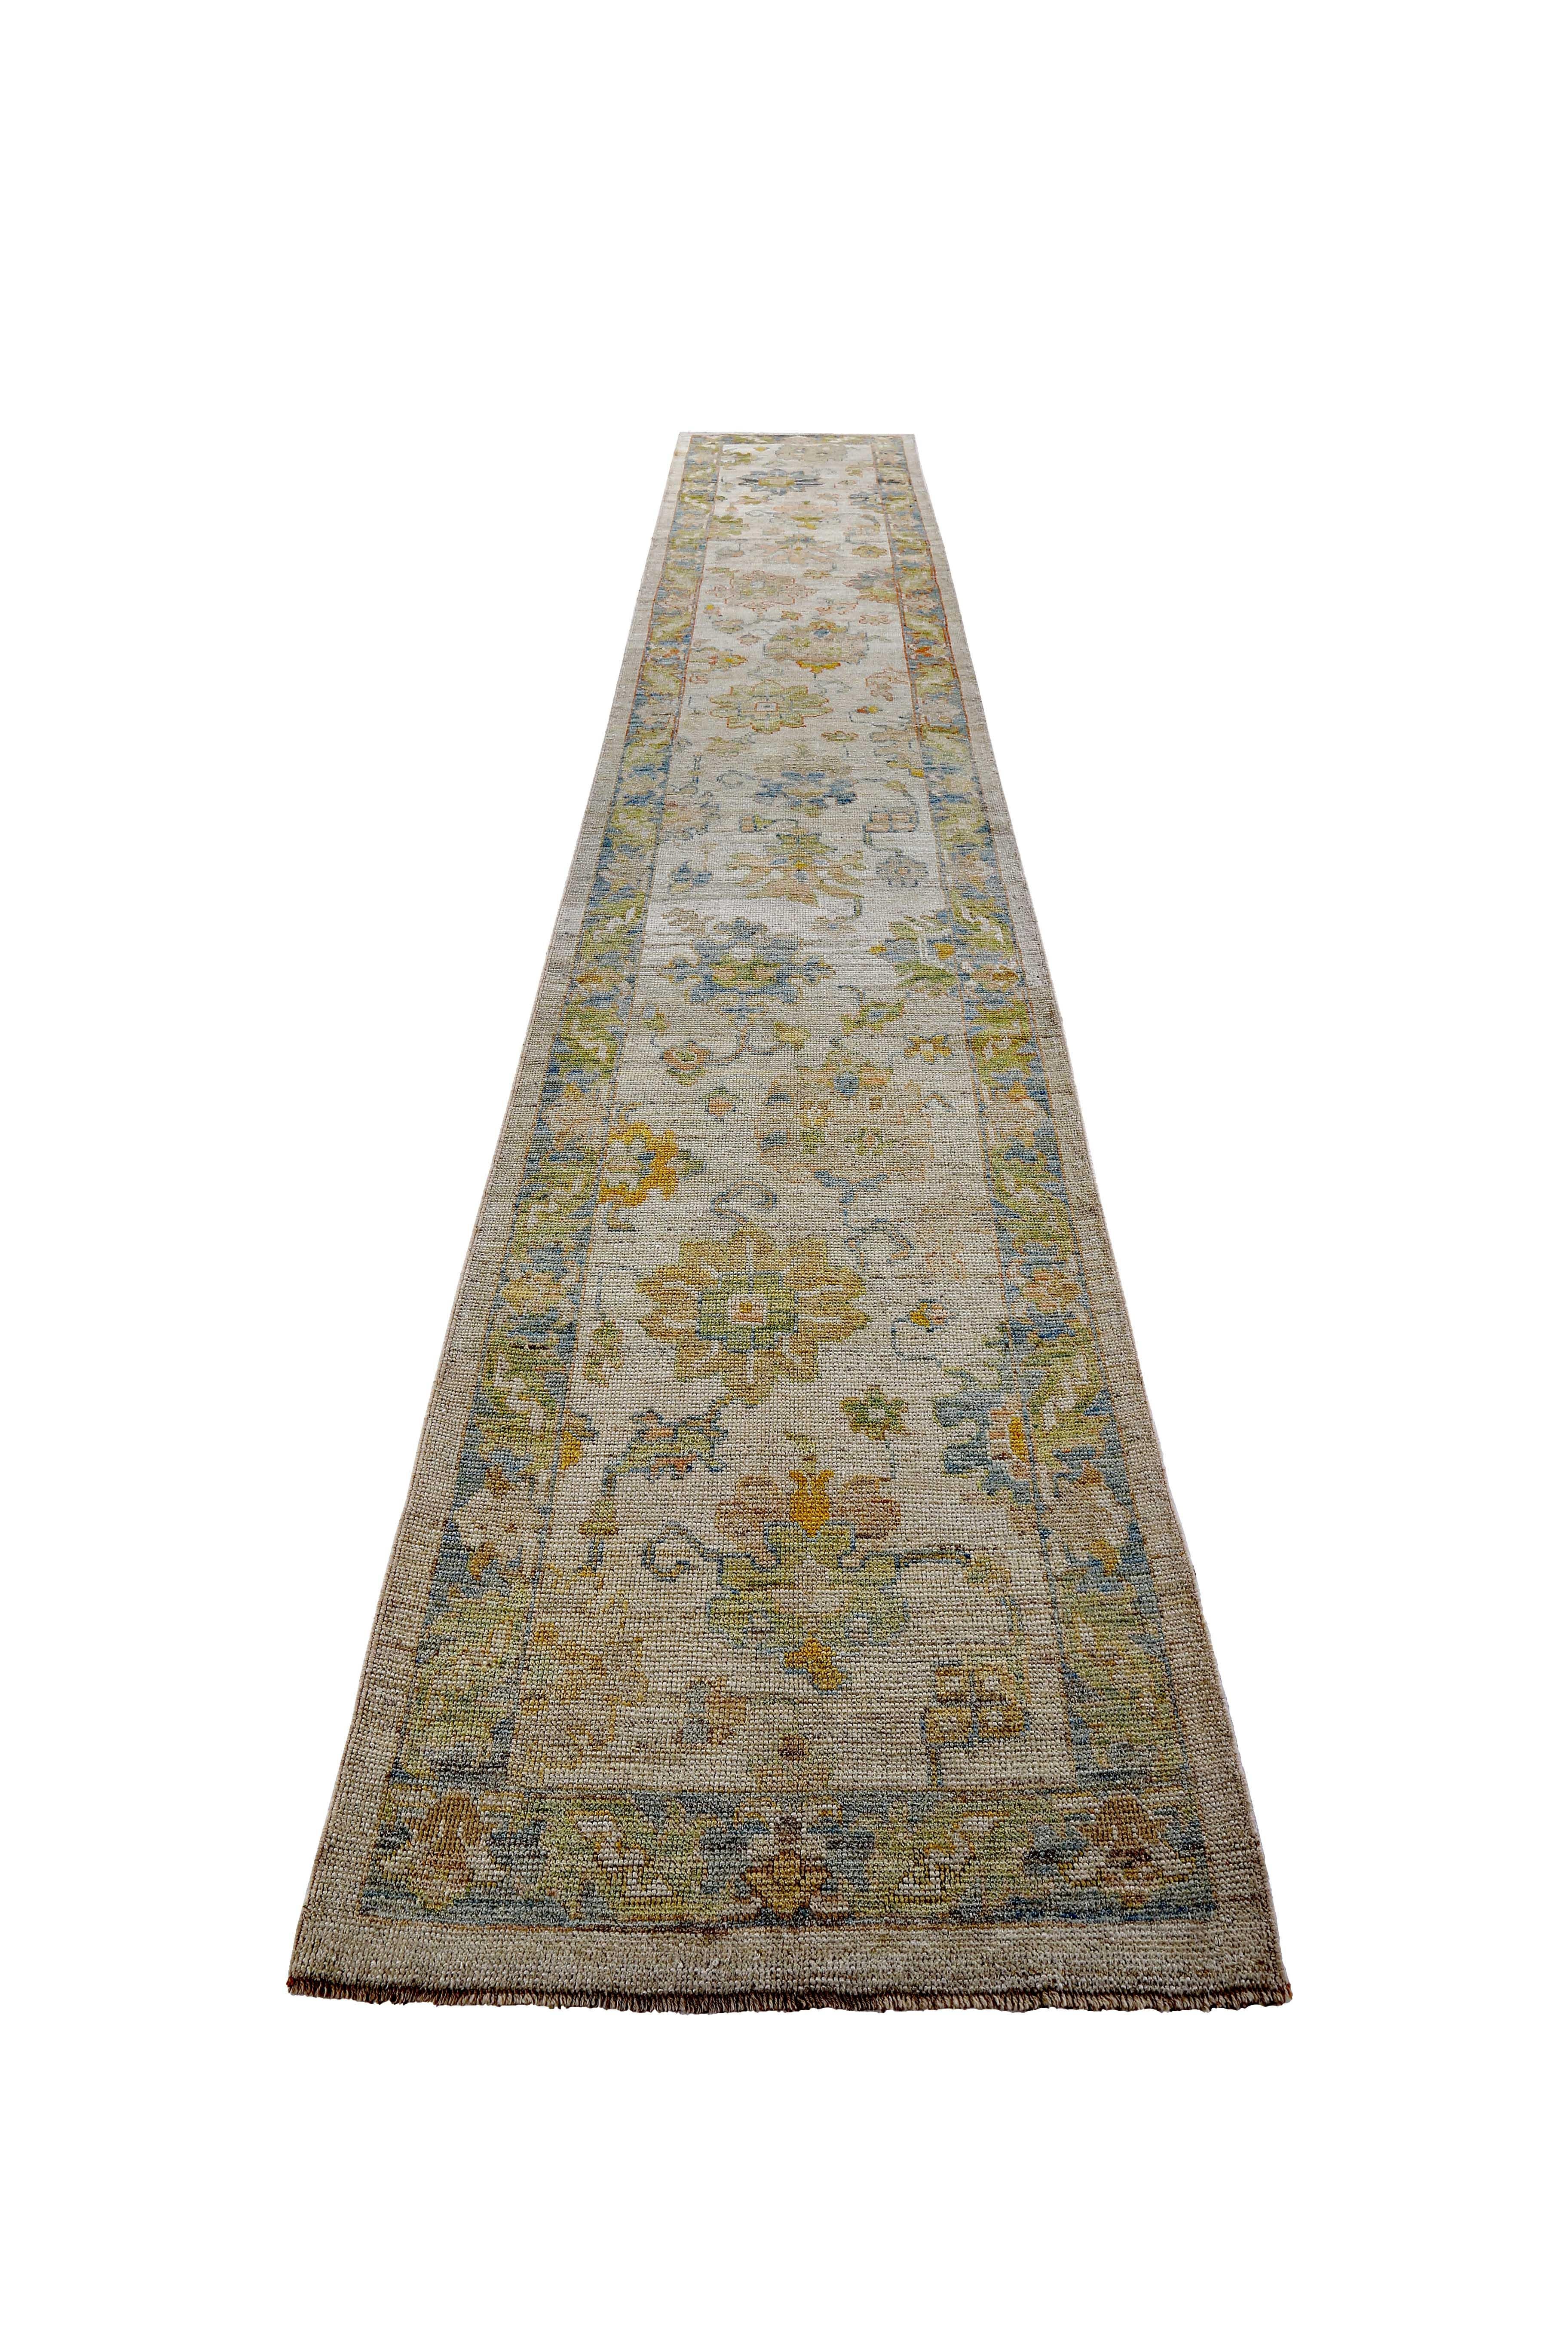 New Turkish rug made of handwoven sheep’s wool of the finest quality. It’s colored with organic vegetable dyes that are certified safe for humans and pets alike. It features navy and green floral details on a lovely ivory field. Flower patterns are